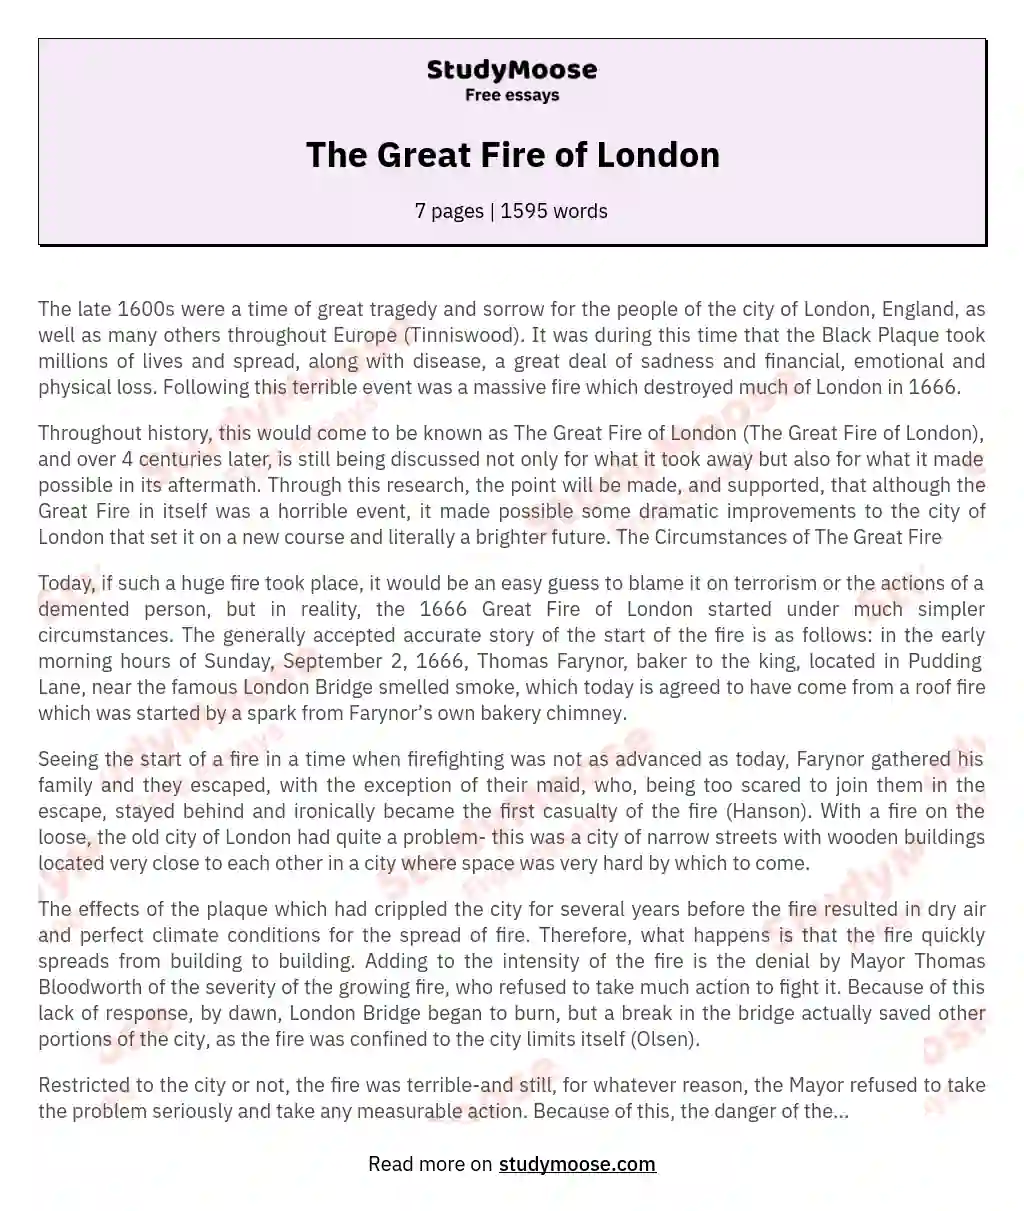 The Great Fire of London essay